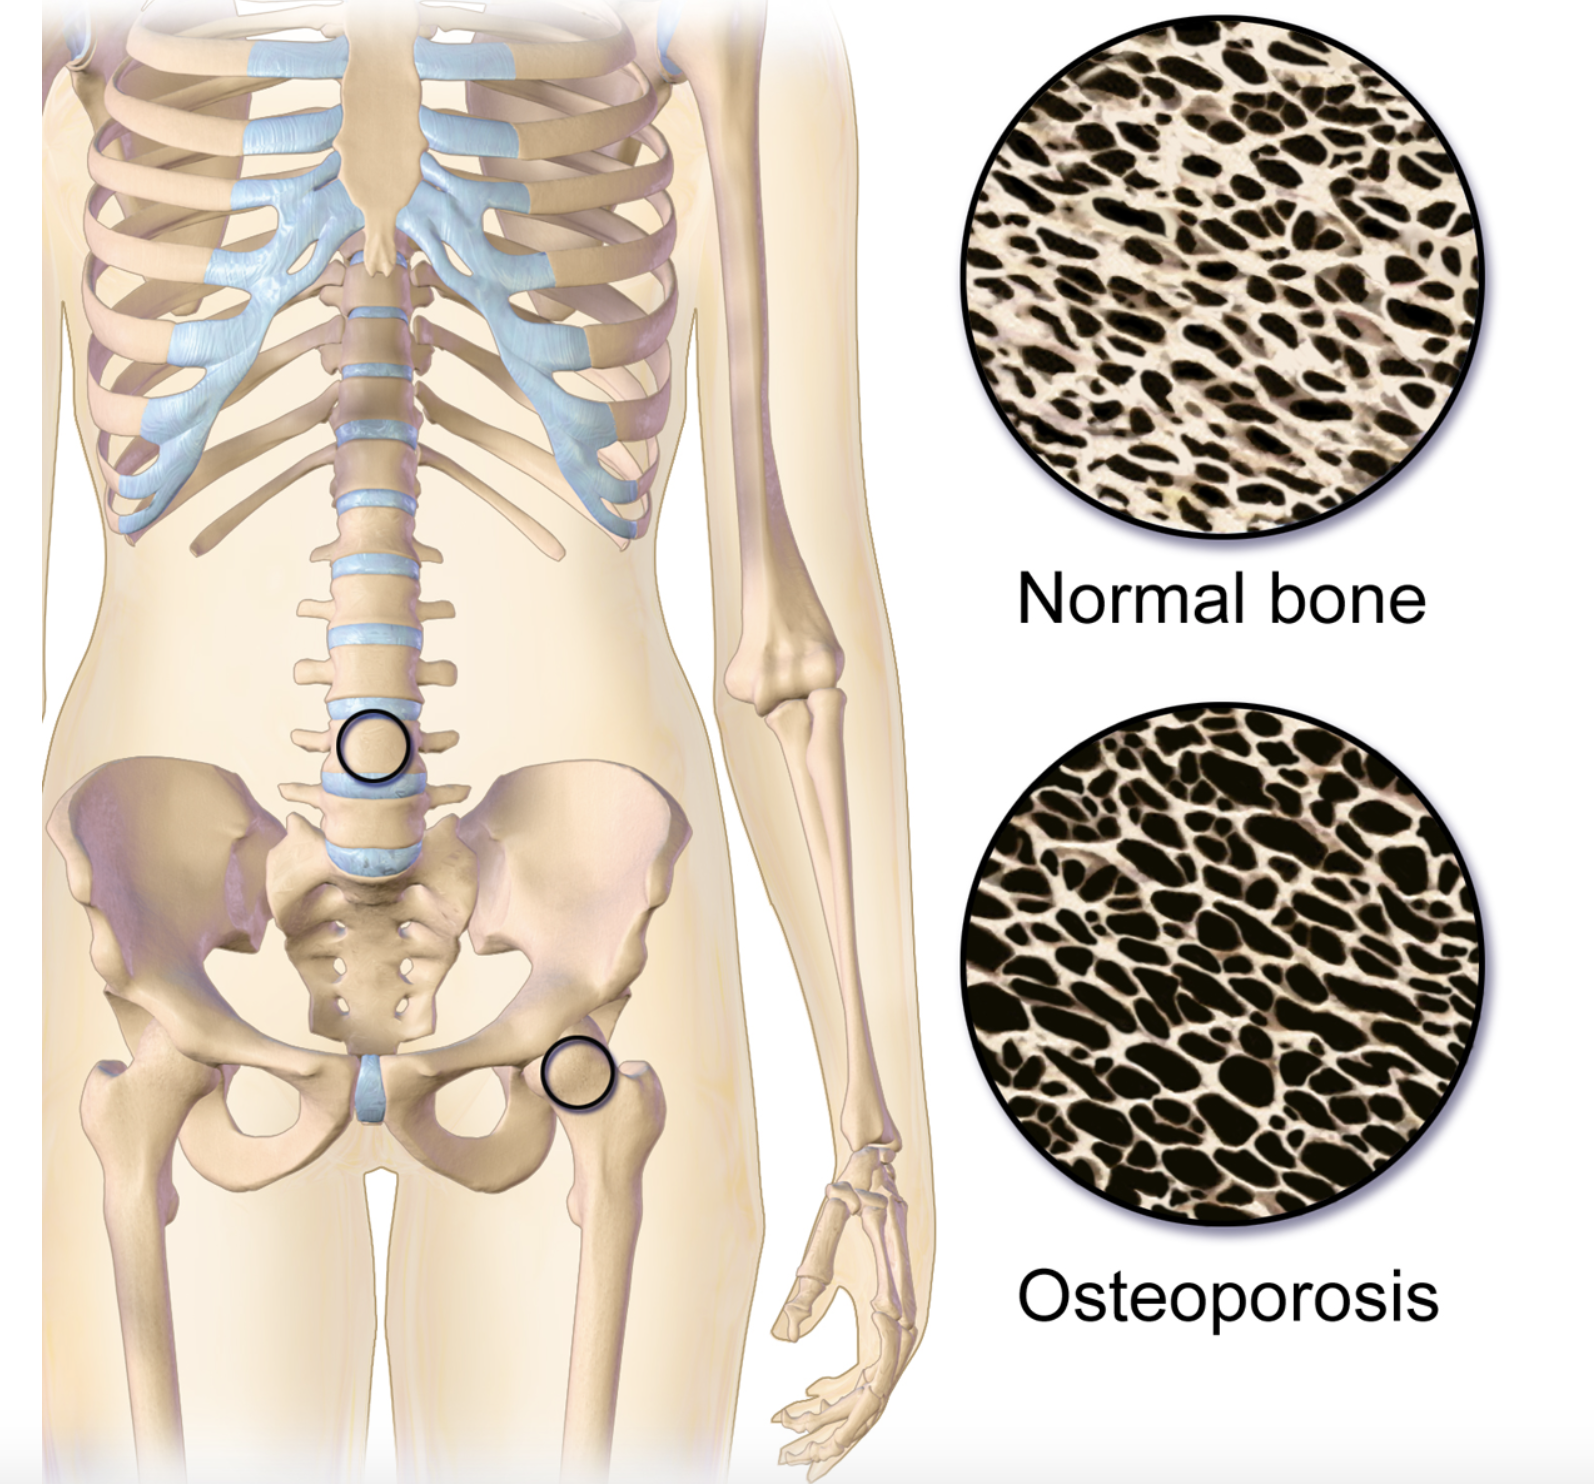 This is an animated image that shows the difference between the structure of normal bone which is less porous and bone with osteoporosis which is more porous.